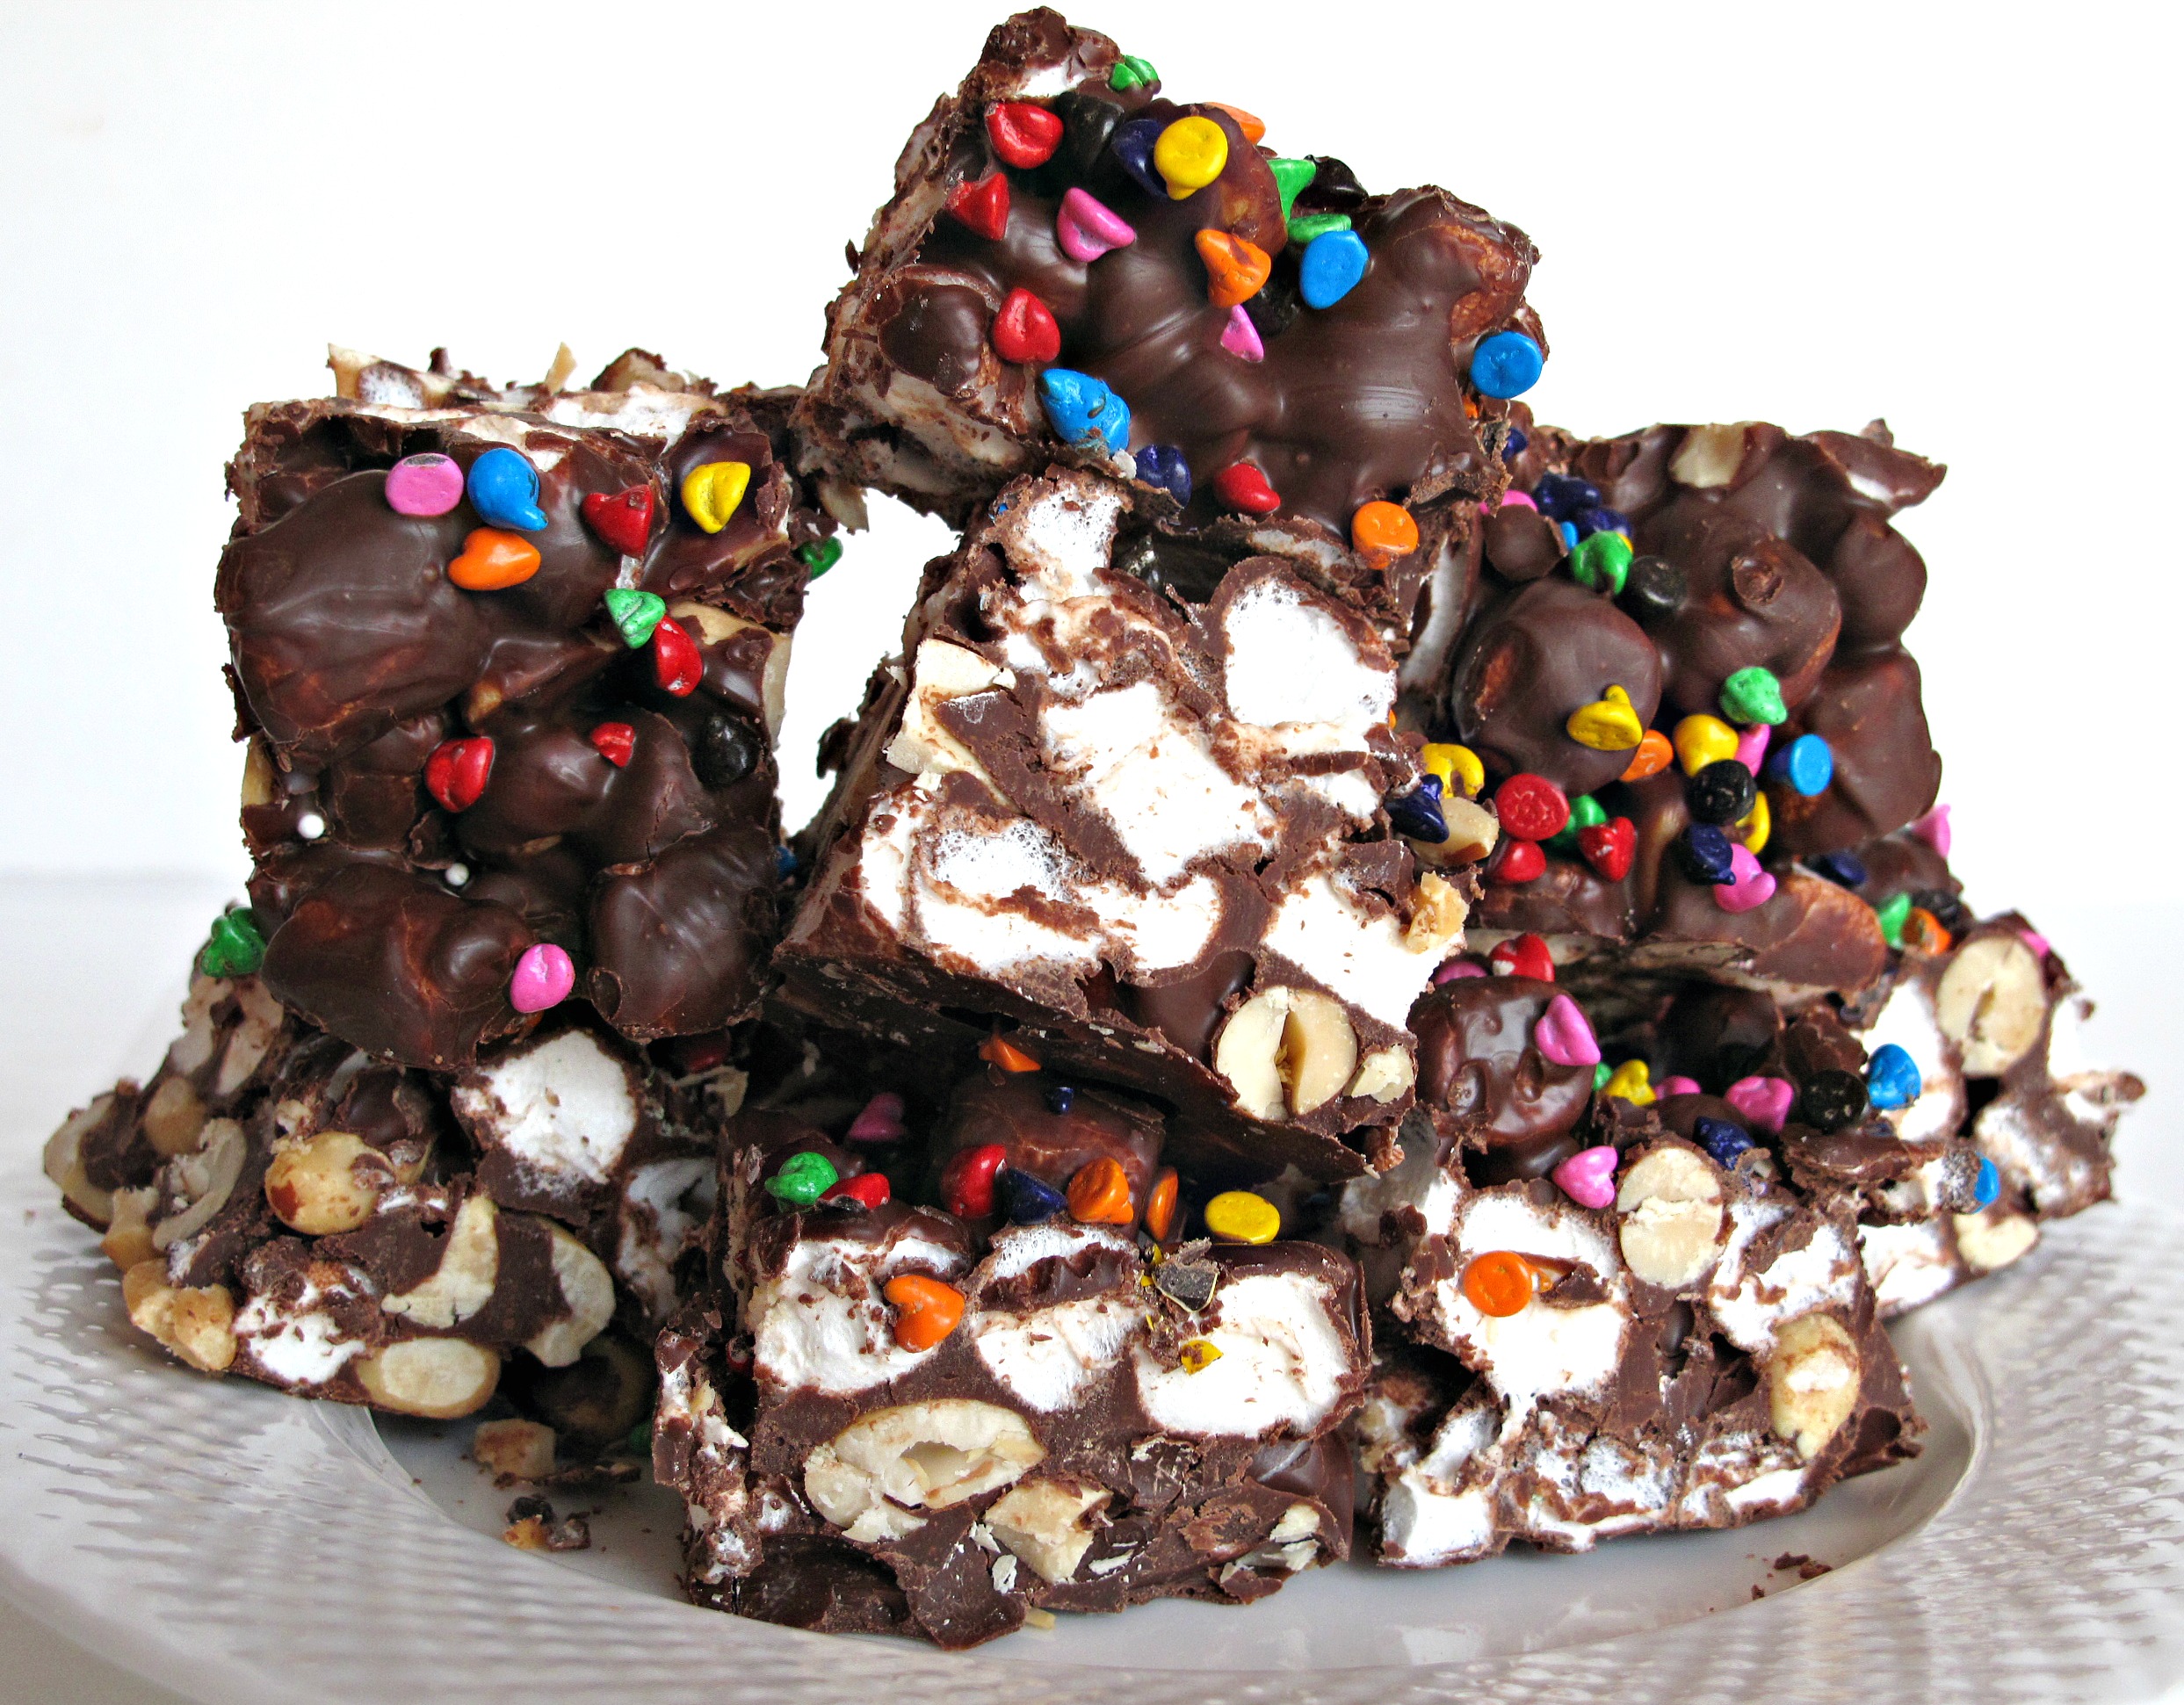 Rainbow's End Rocky Road Candy chunks showing interior marshmallows and peanuts surrounded by chocolate.